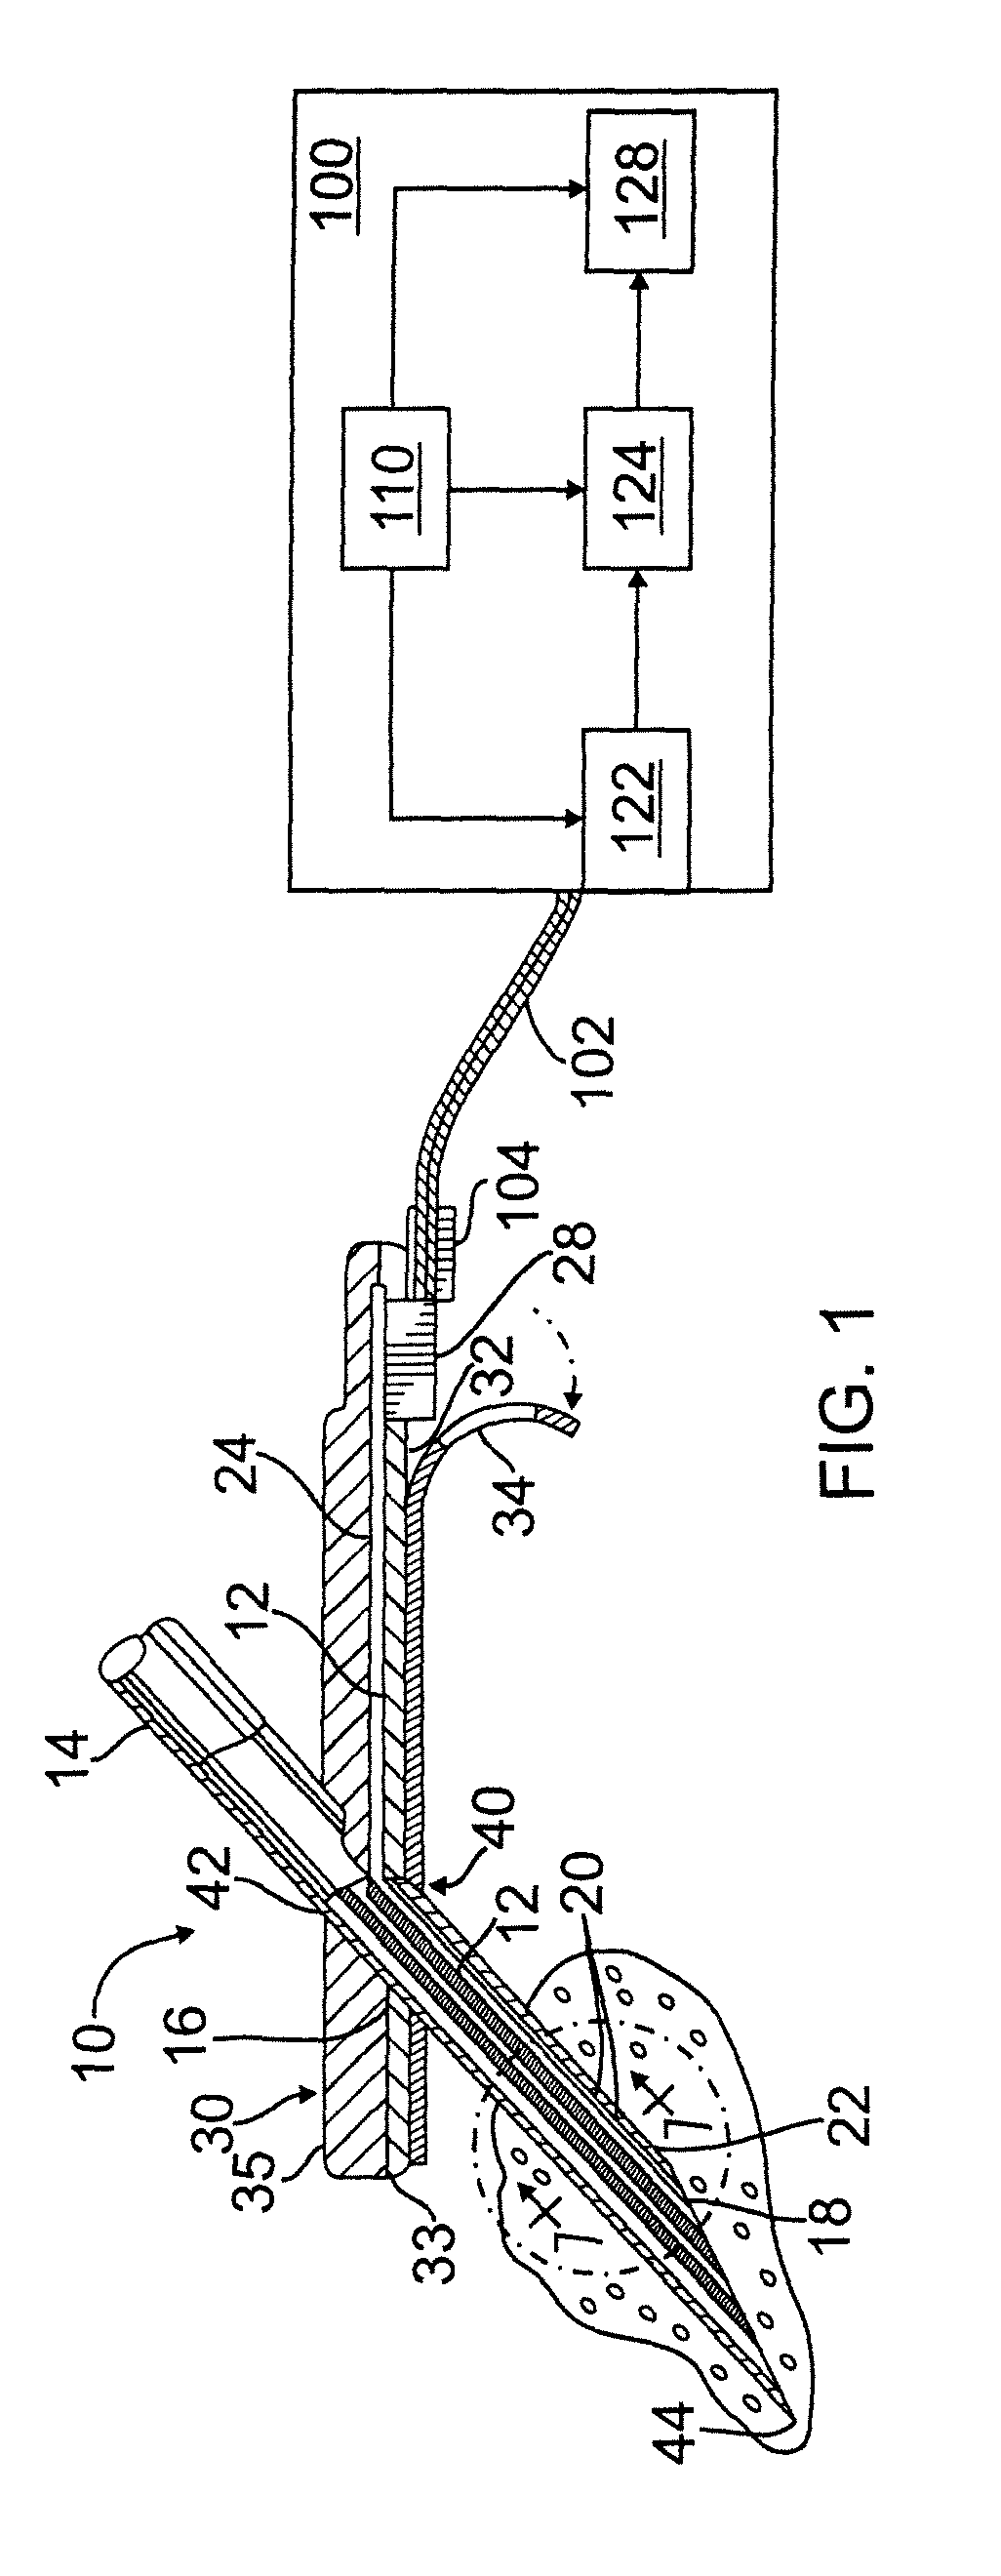 Methods and systems for observing sensor parameters